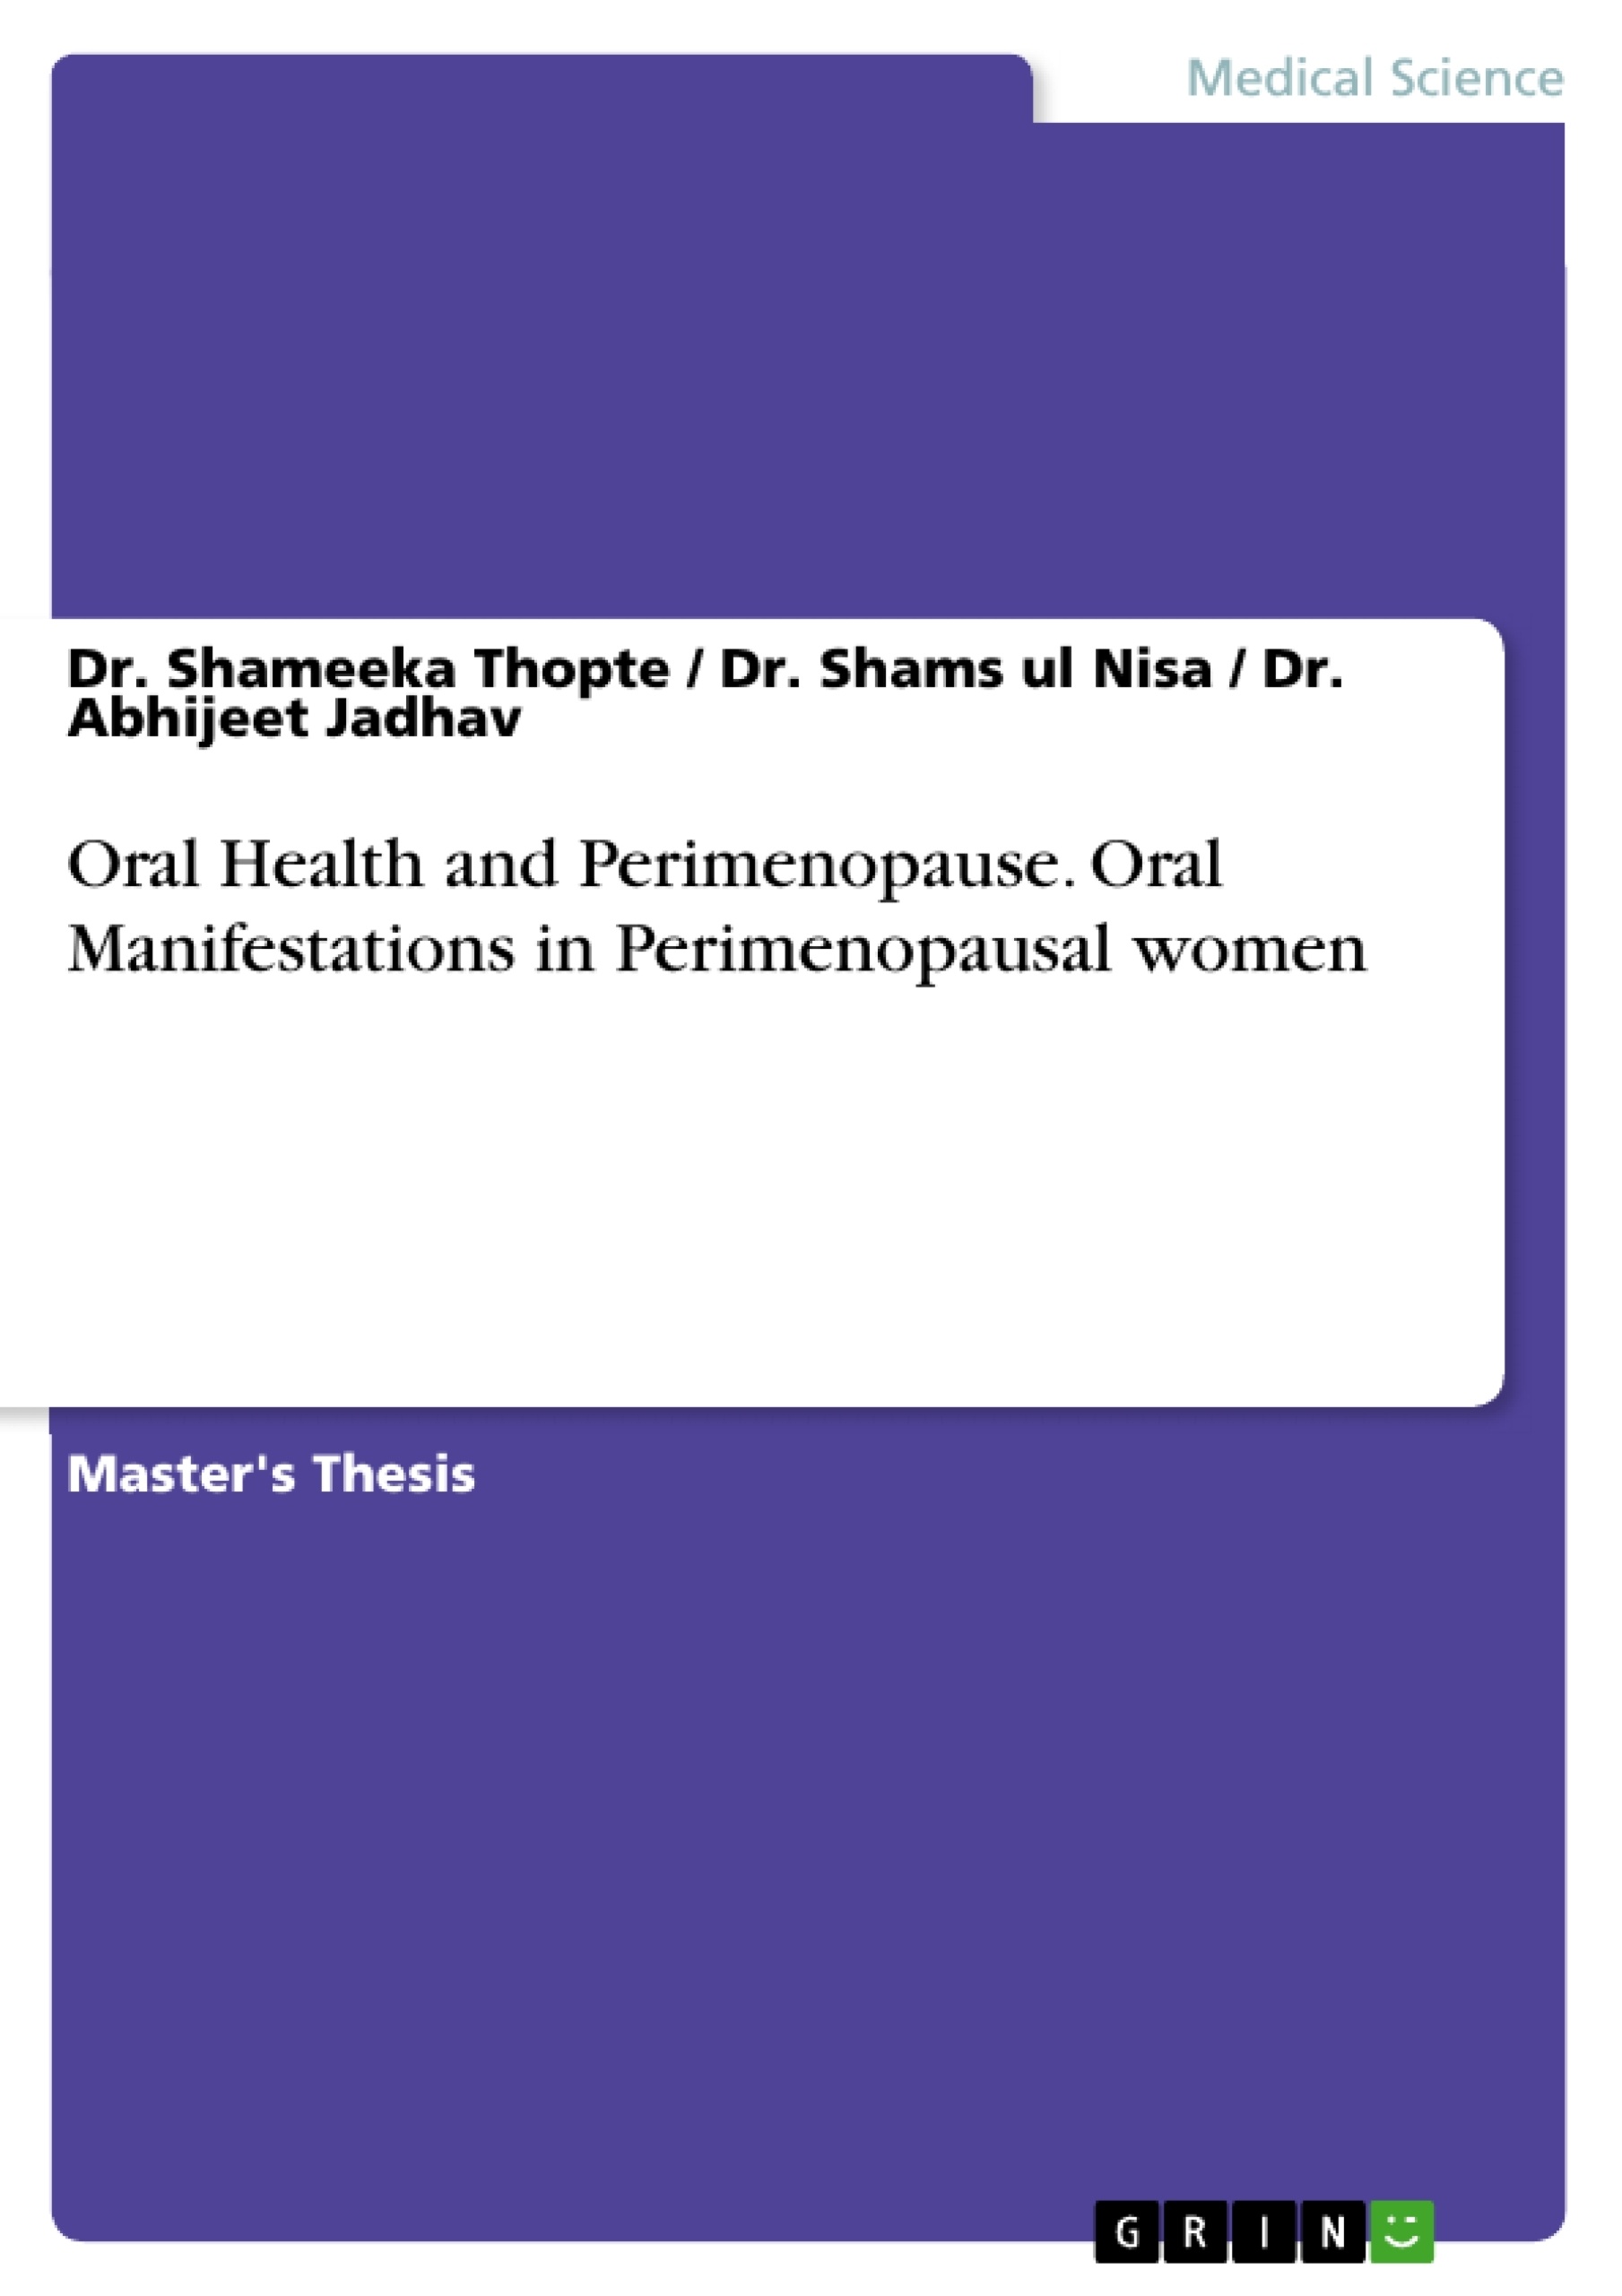 Titre: Oral Health and Perimenopause. Oral Manifestations in Perimenopausal women